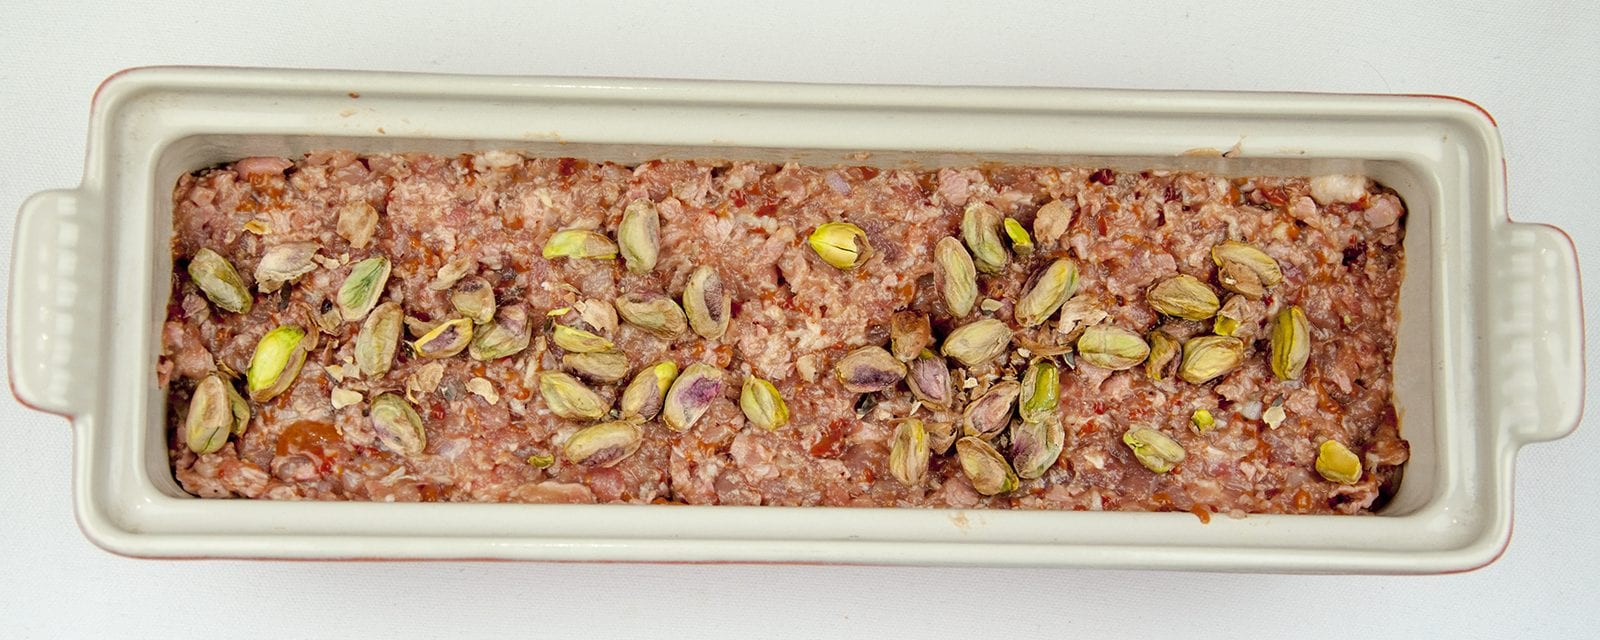 Duck, pork, cranberry and pistachio terrine. A wonderful recipe for your Christmas table. Very festive and a great appetiser before the turkey. Learn how to make this irresistible rustic farmhouse terrine. Yum Yum!! | theyumyumclub.com